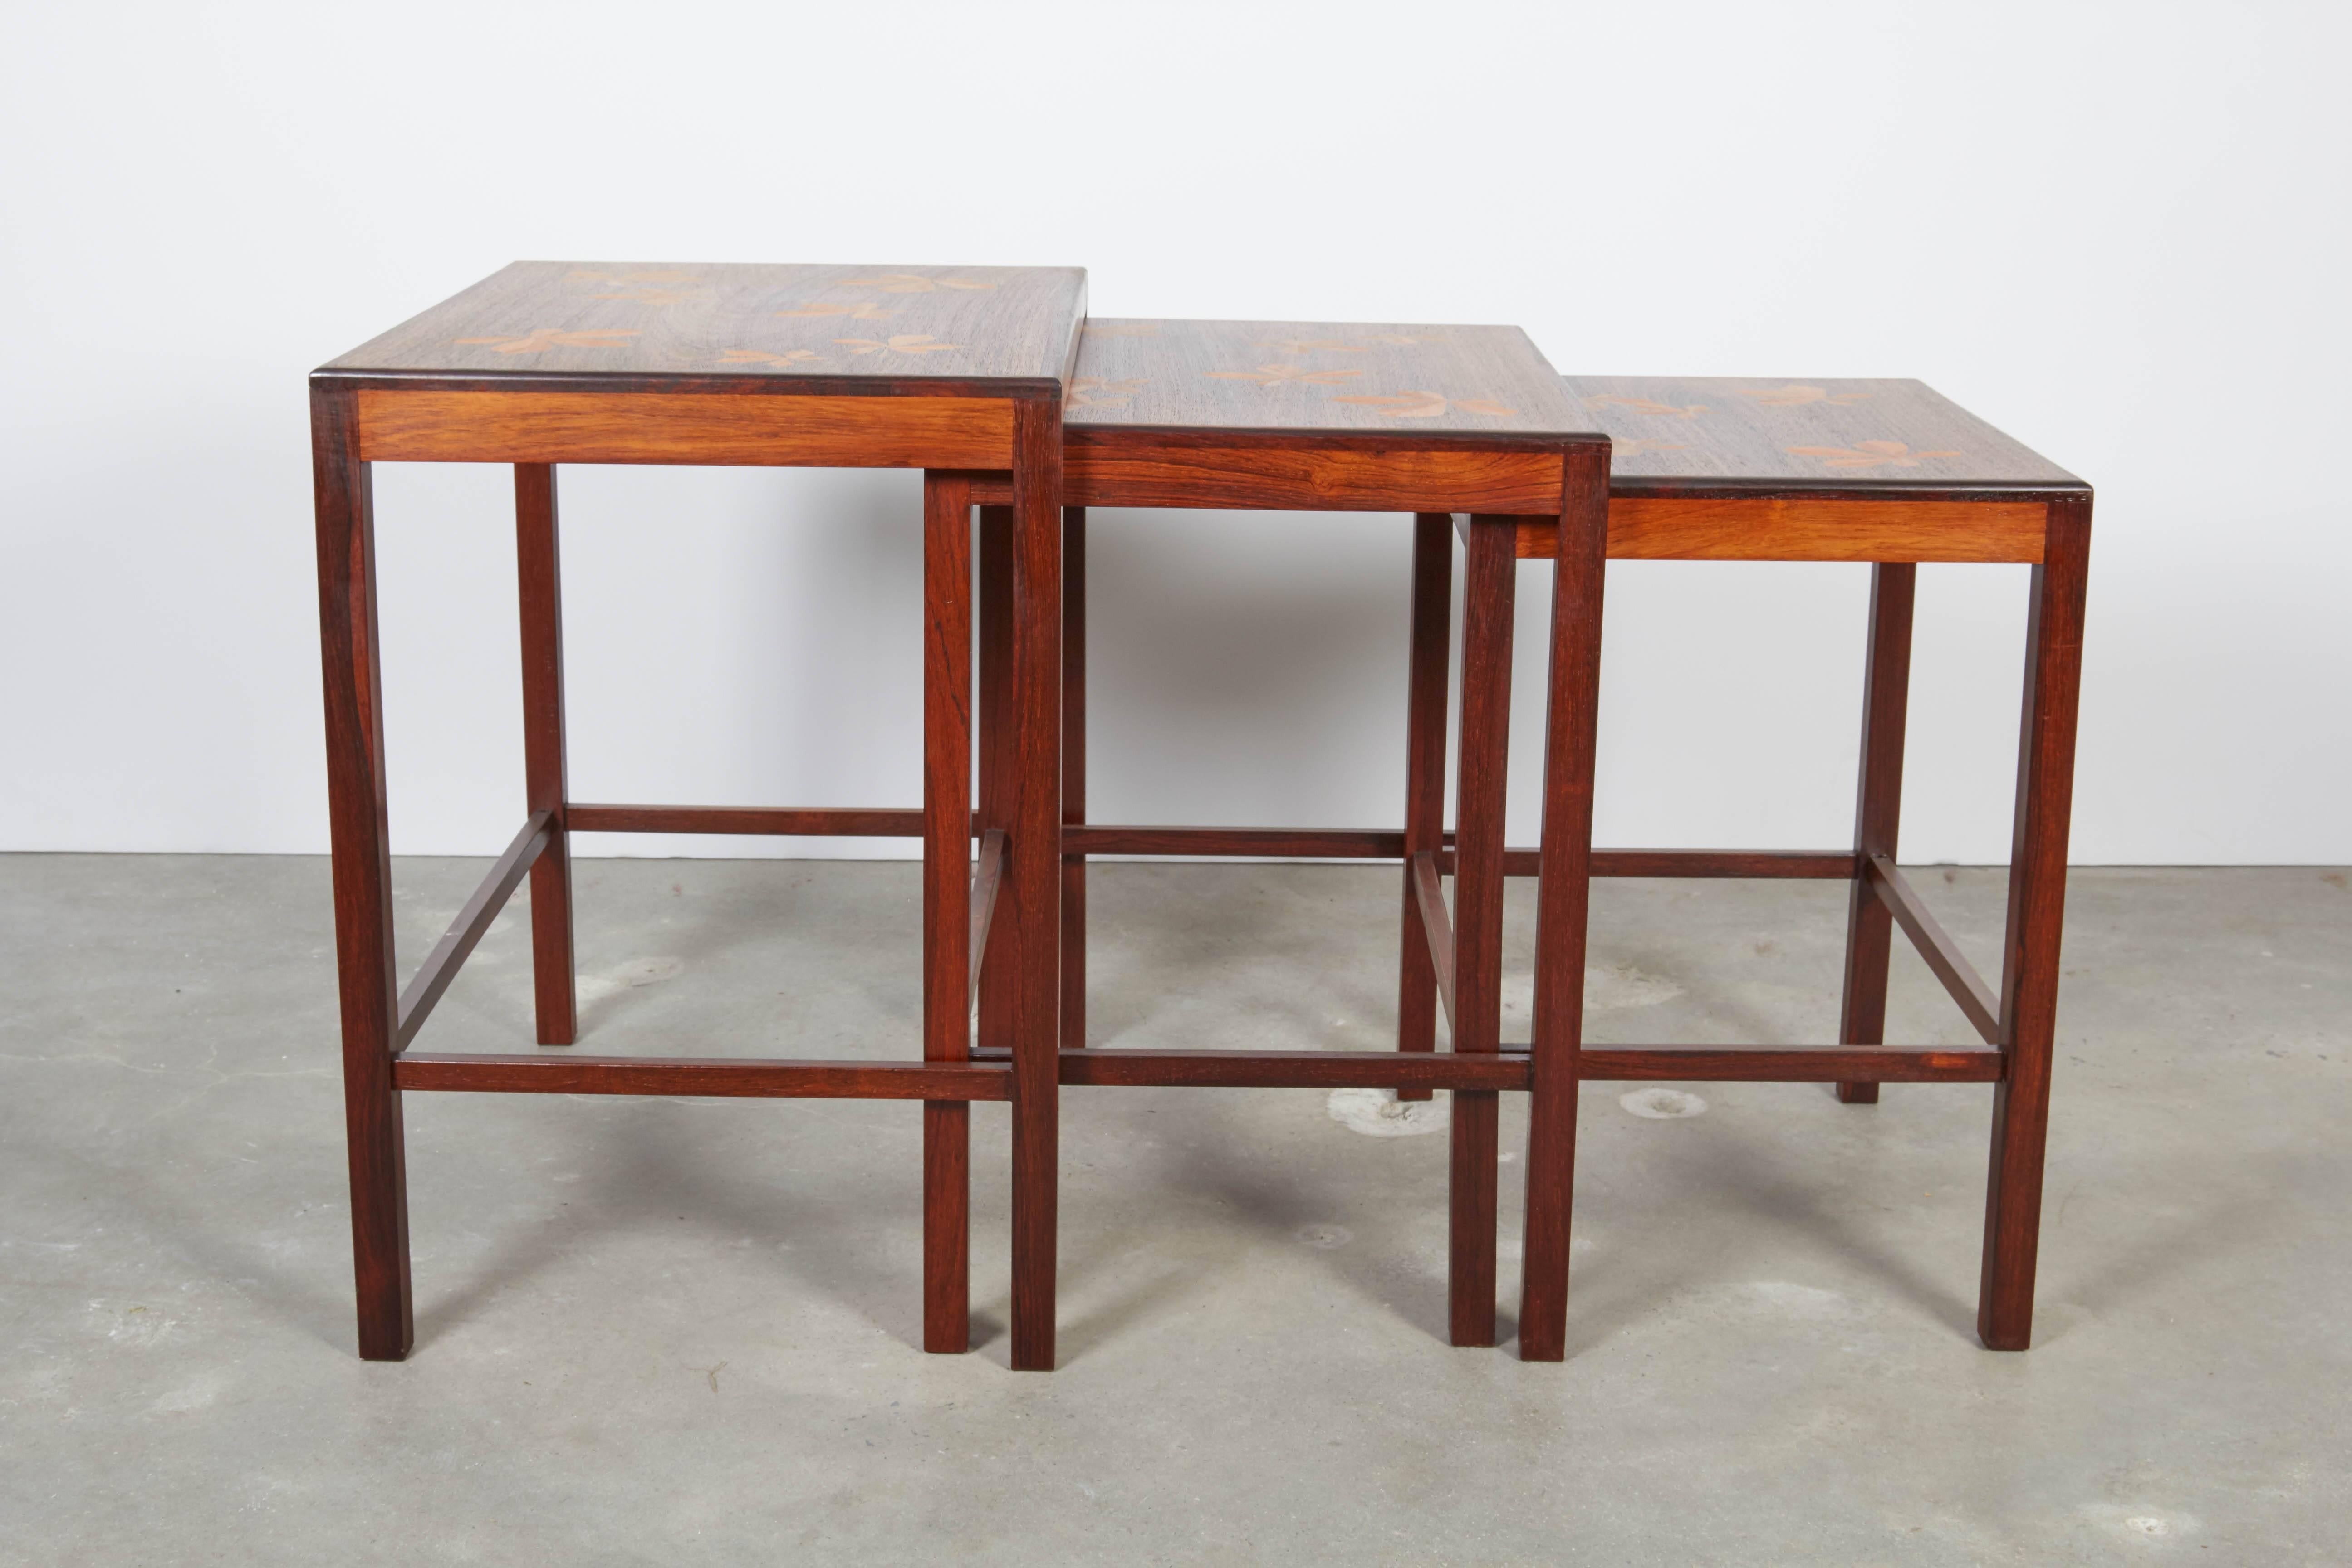 Danish Rosewood Nesting Tables with Chestnut Inlay